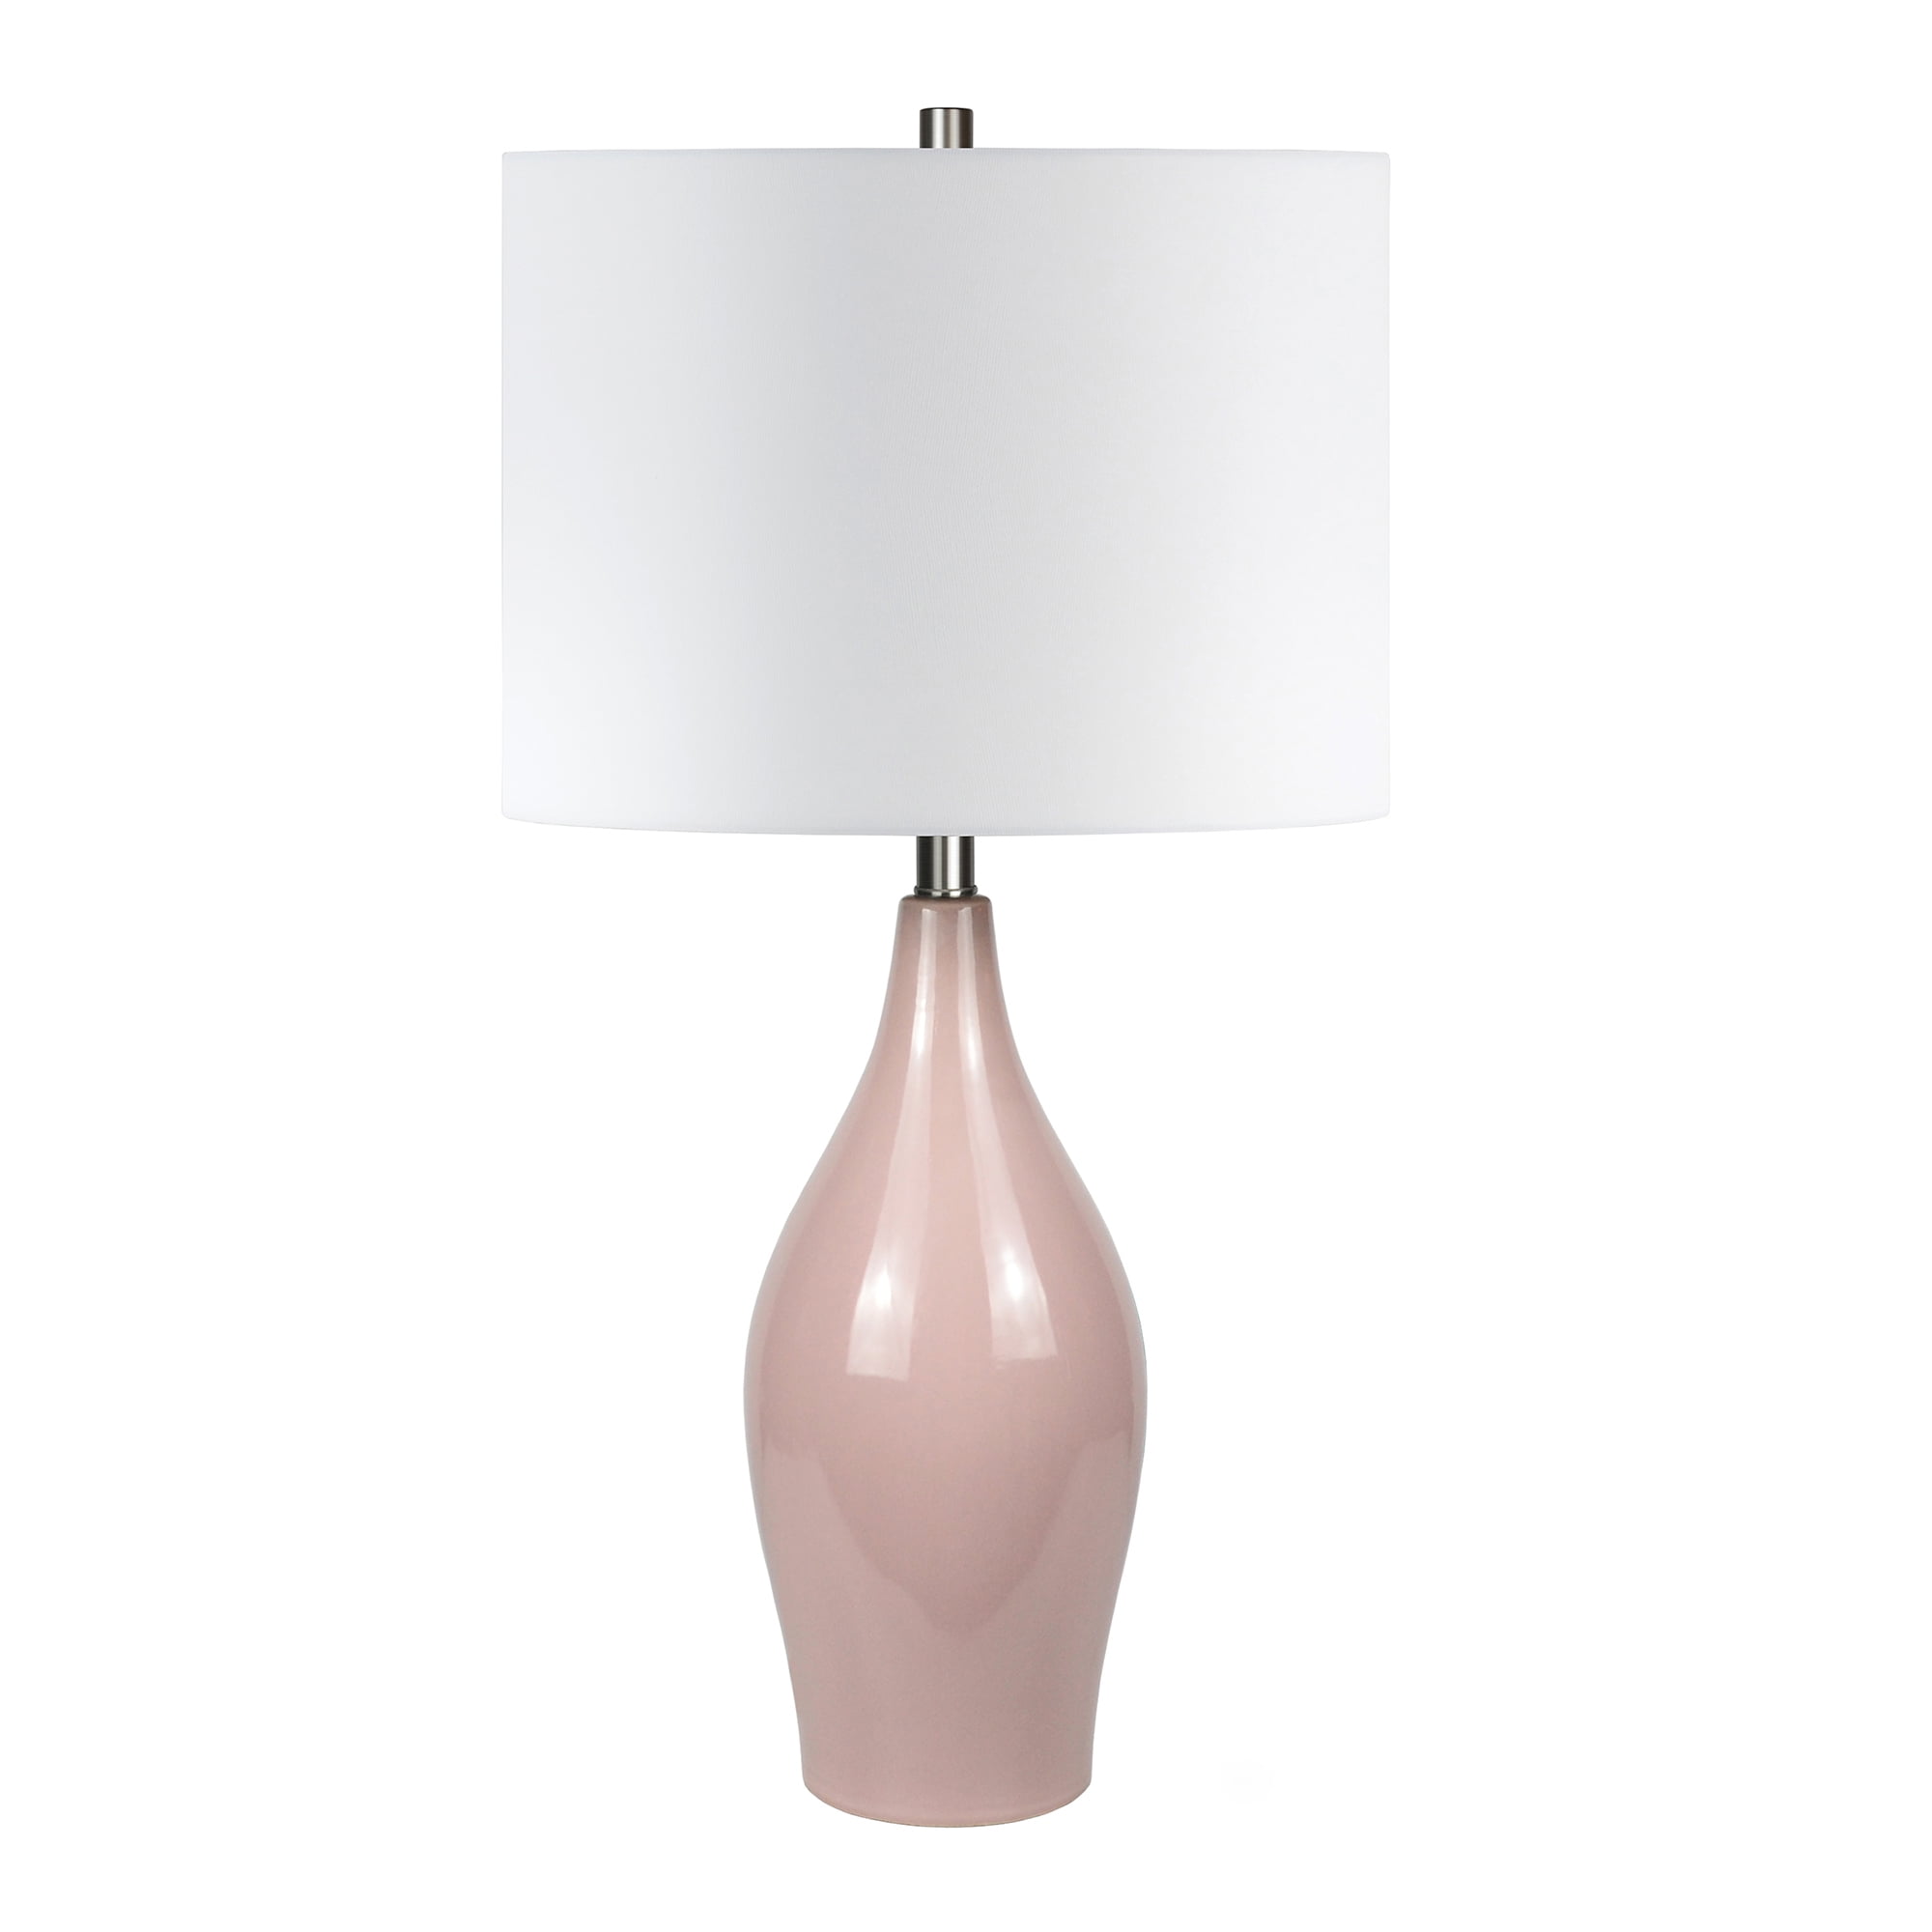 Evelyn Zoe Traditional Porcelain Table, Traditional Table Lamps Porcelain